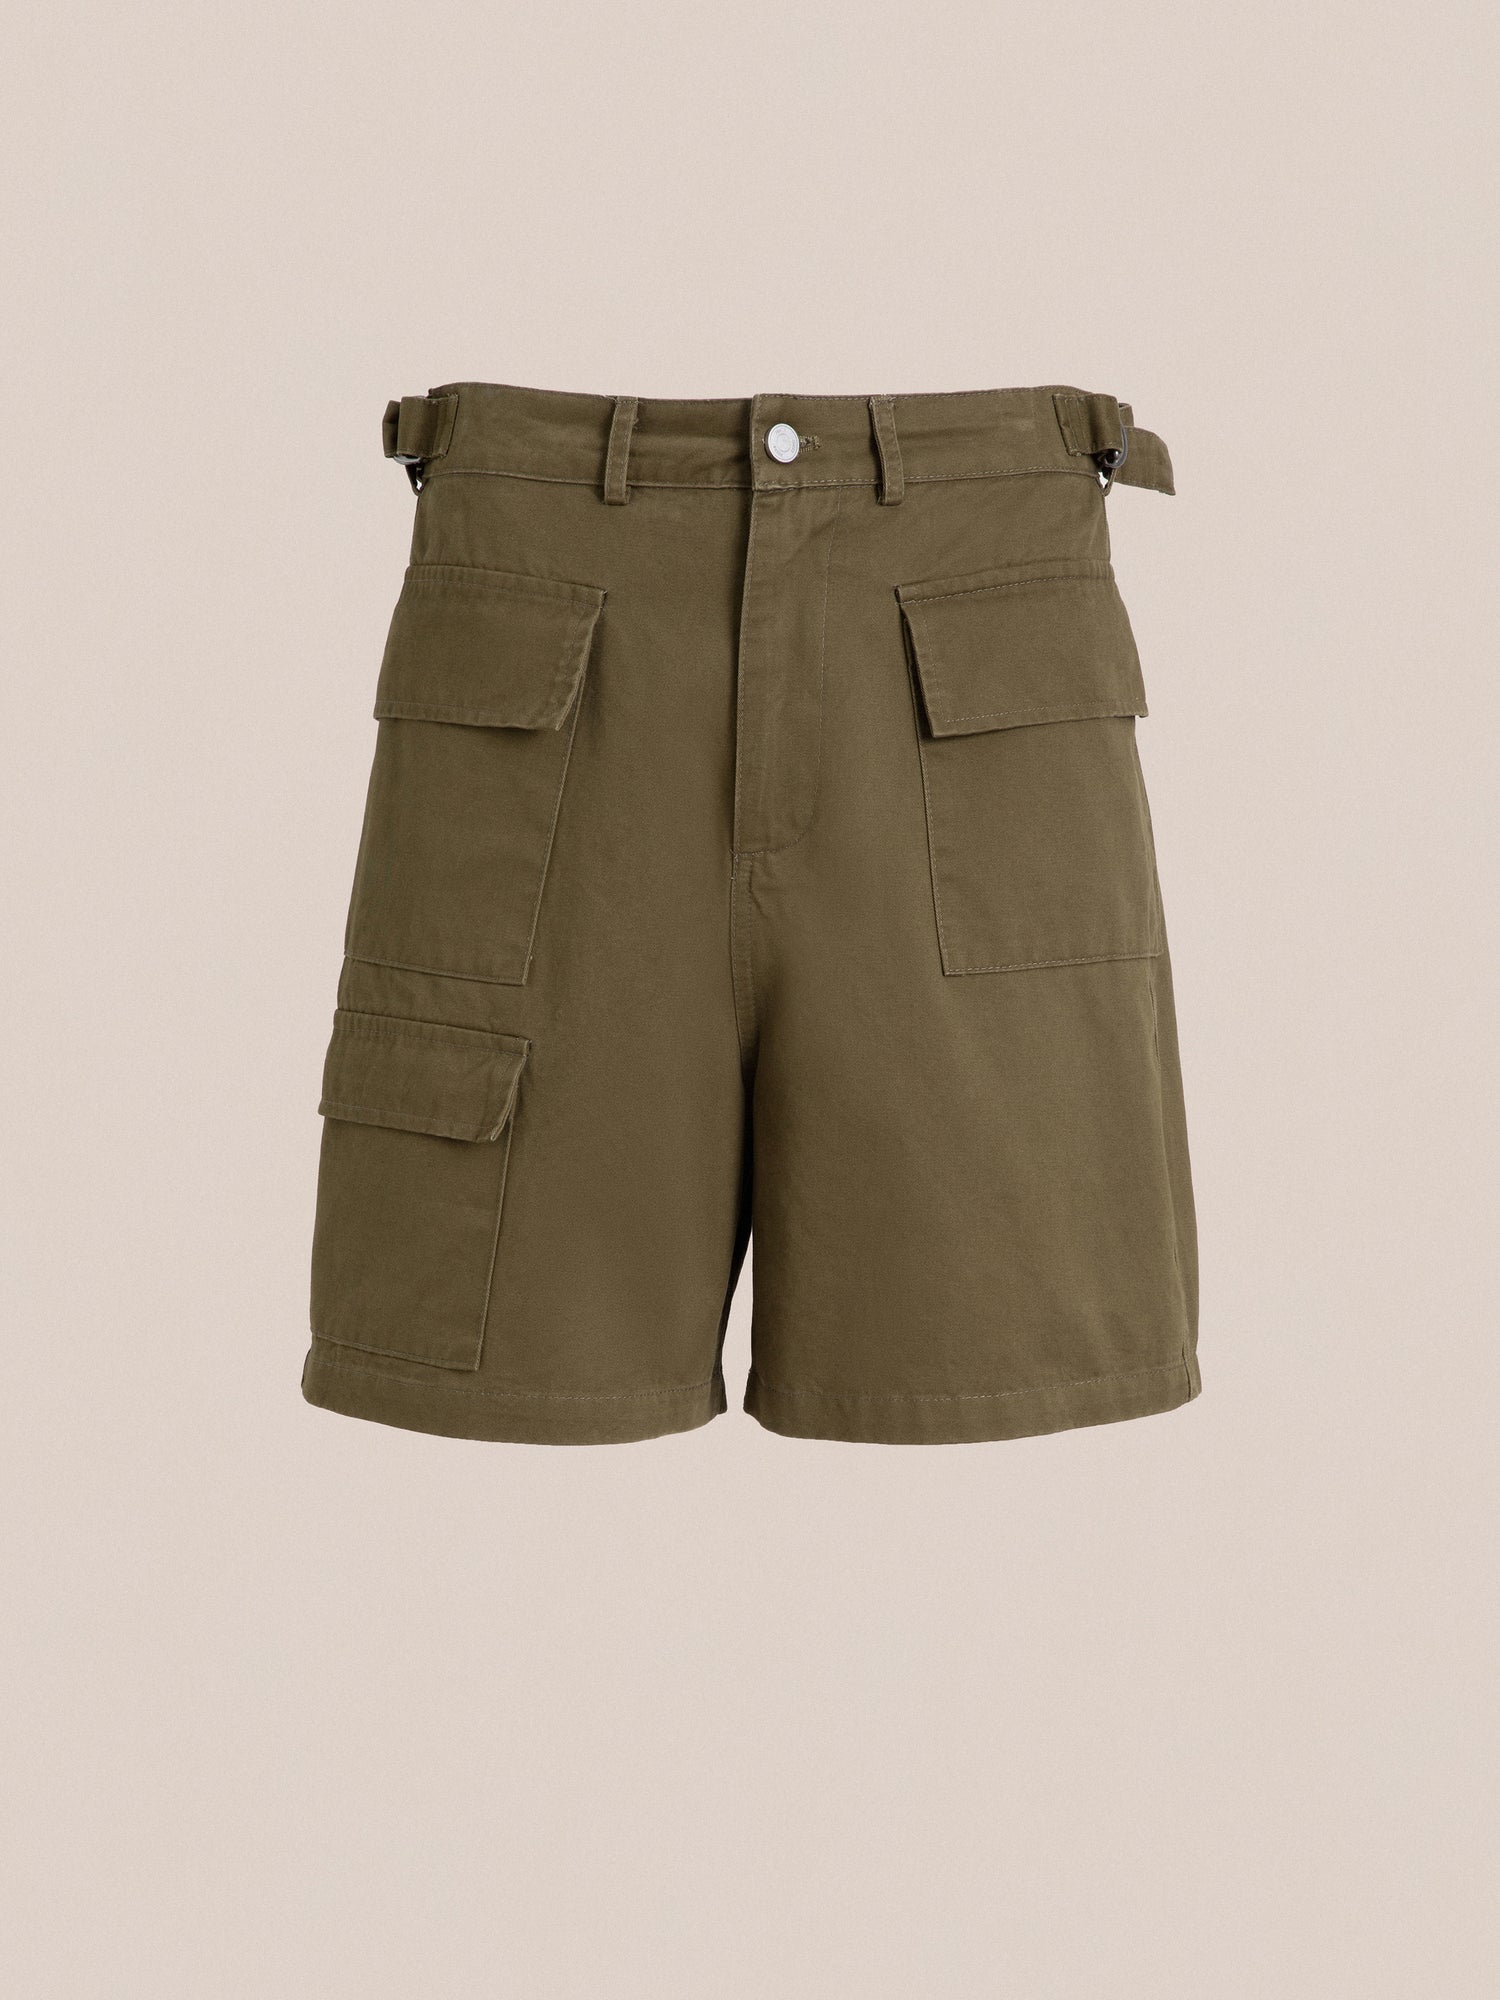 The Found women's twill cargo shorts in olive green feature adjustable waist tabs.